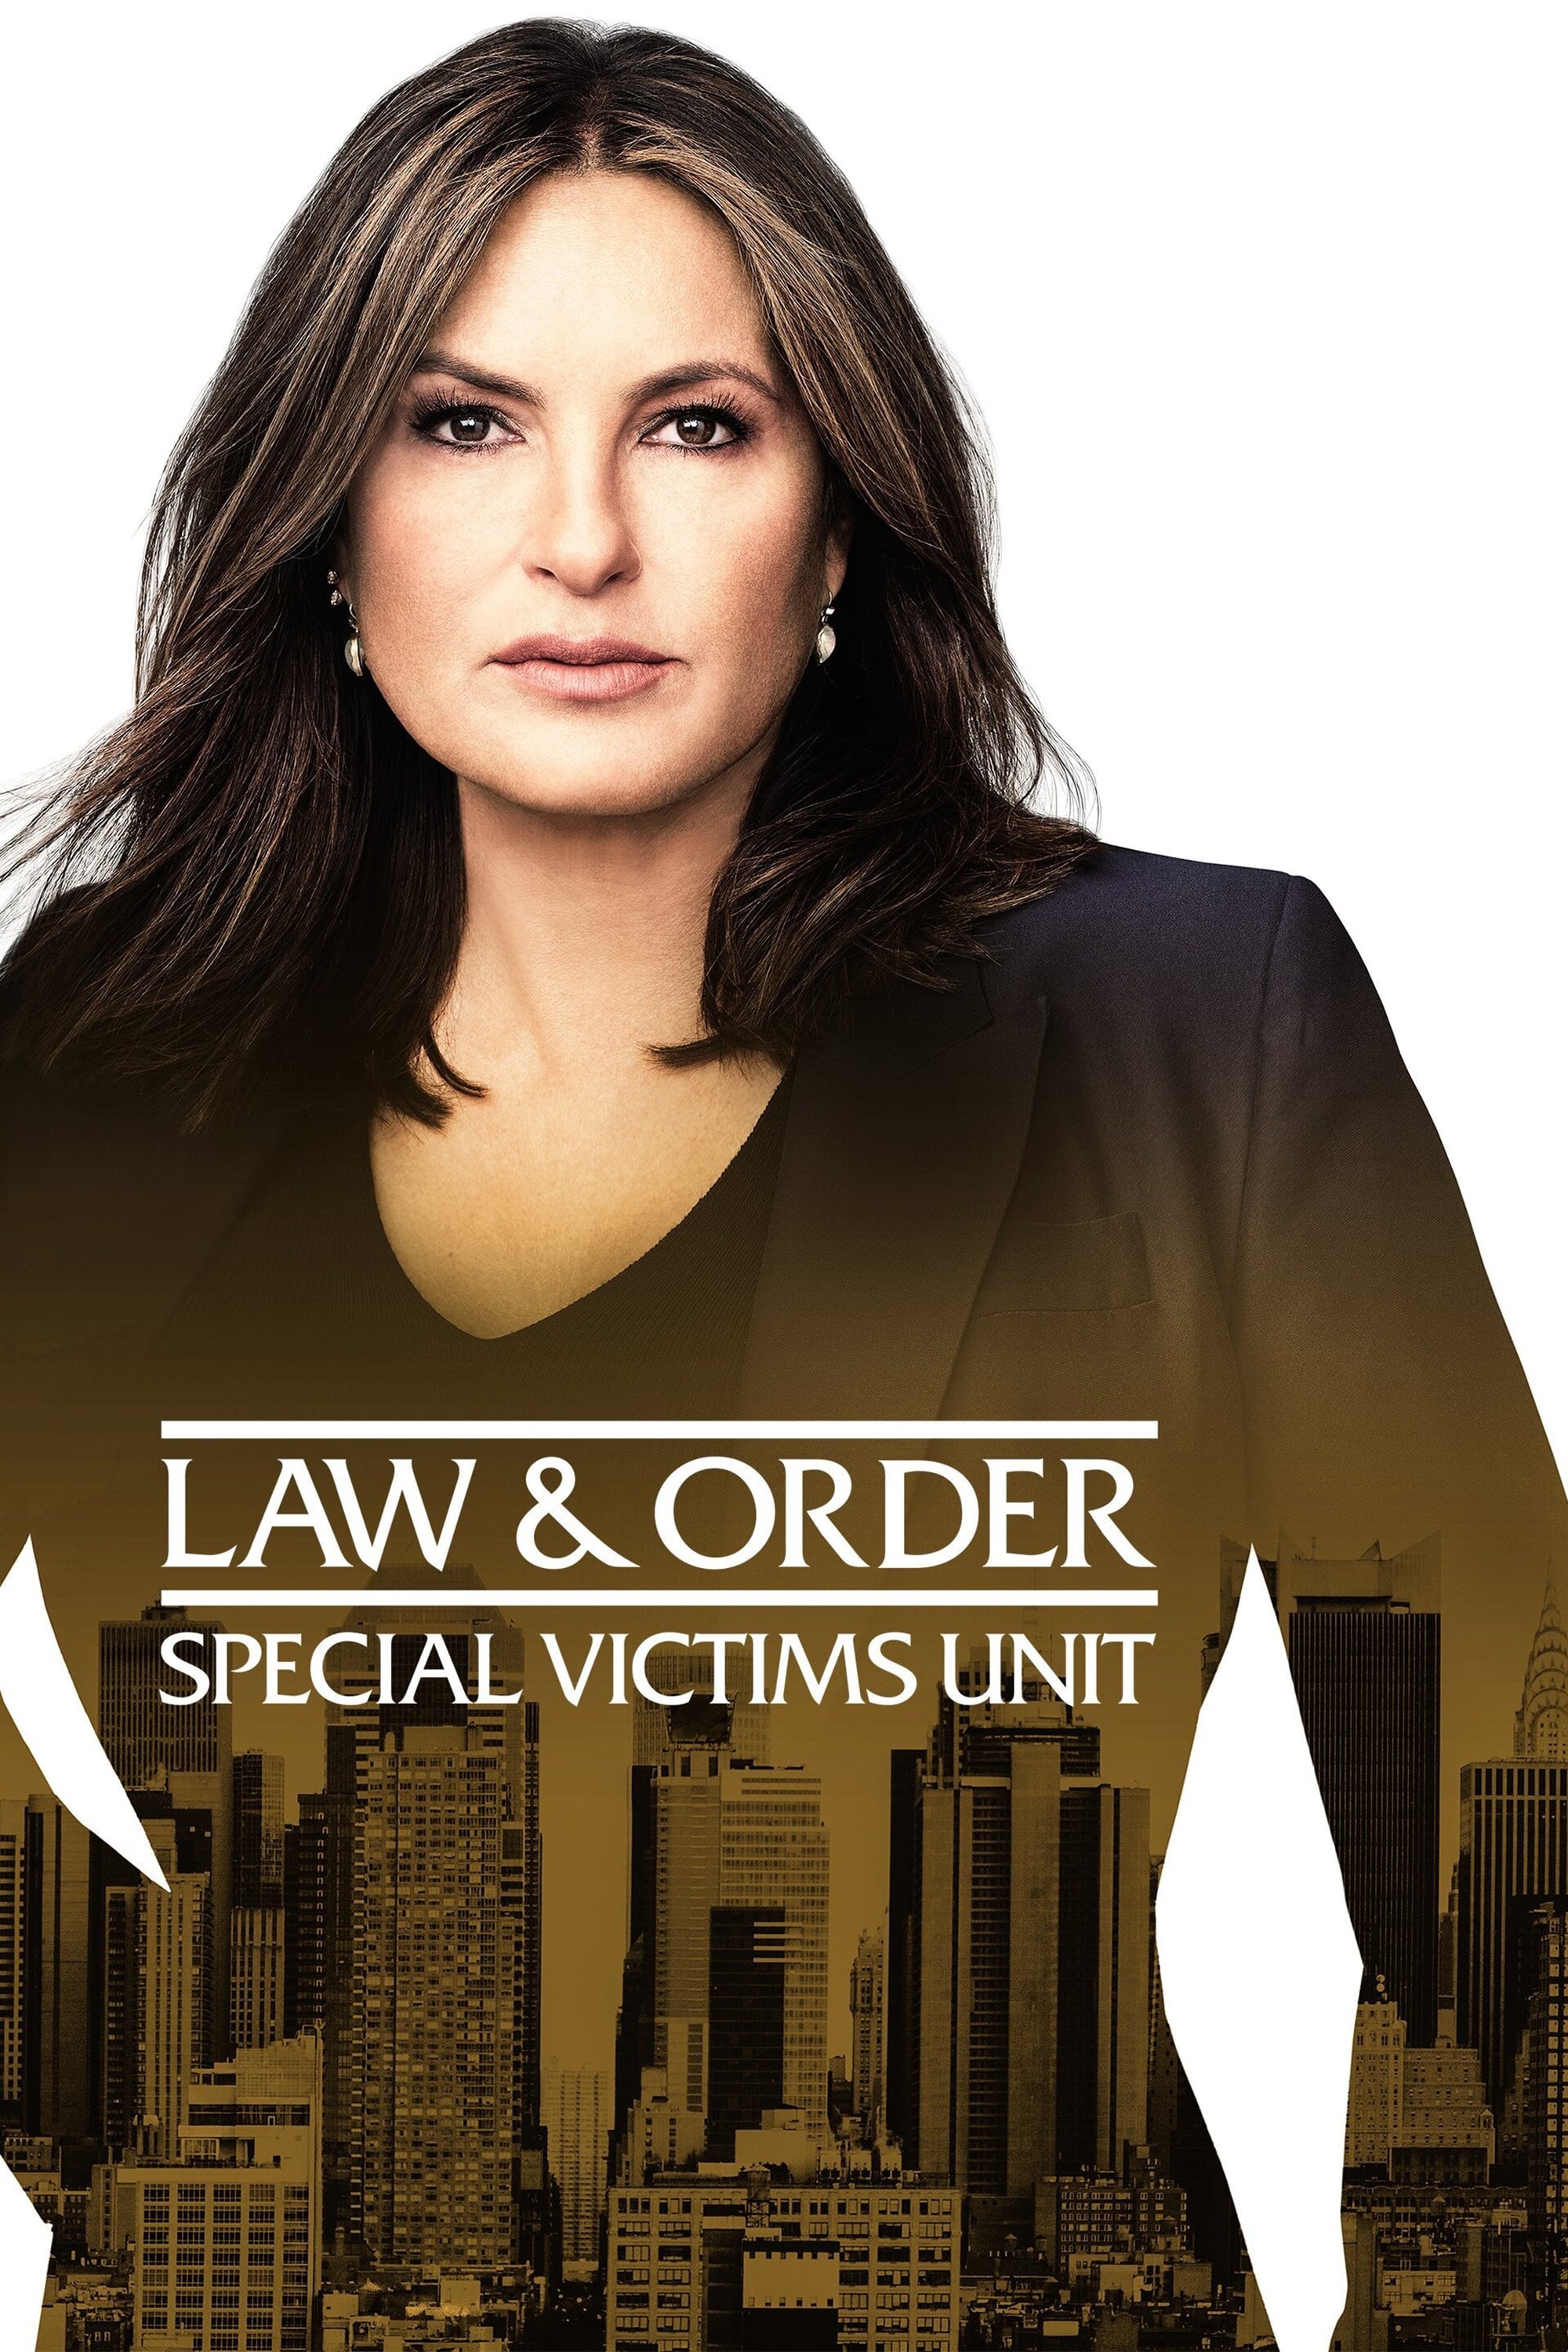 Law & Order: Special Victims Unit TV Shows About Domestic Violence